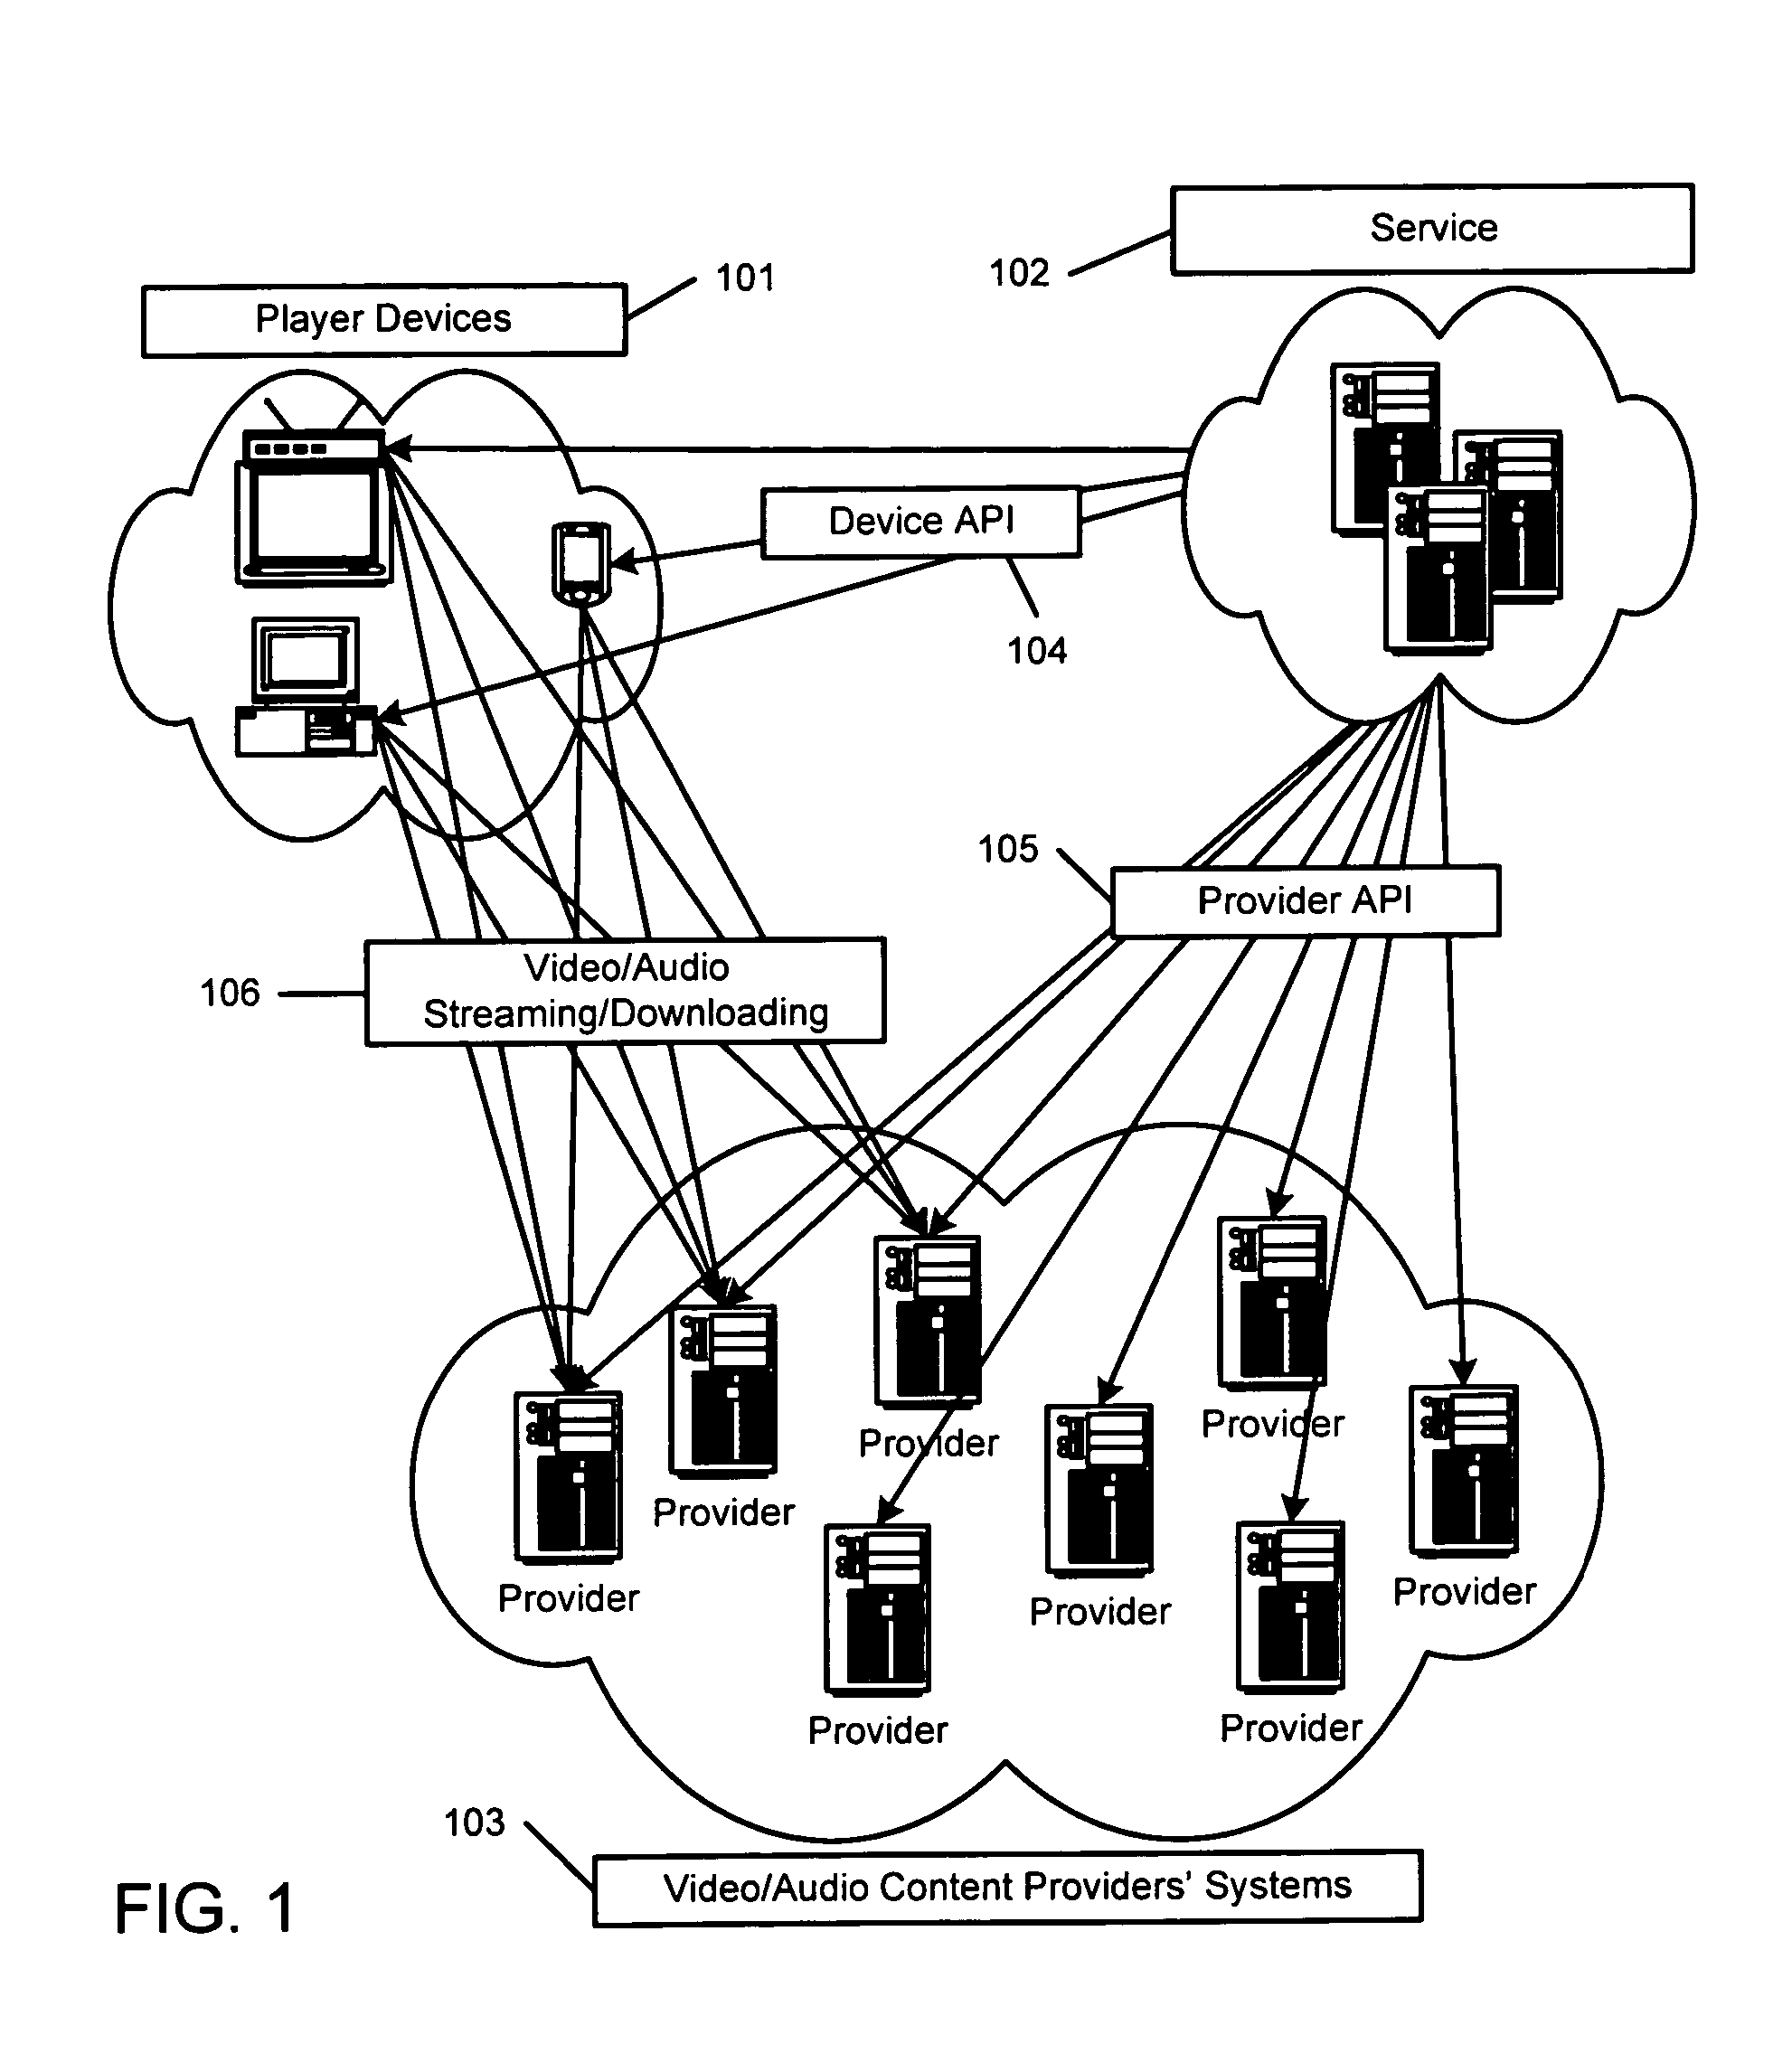 Service and method for providing a single point of access for multiple providers' video and audio content